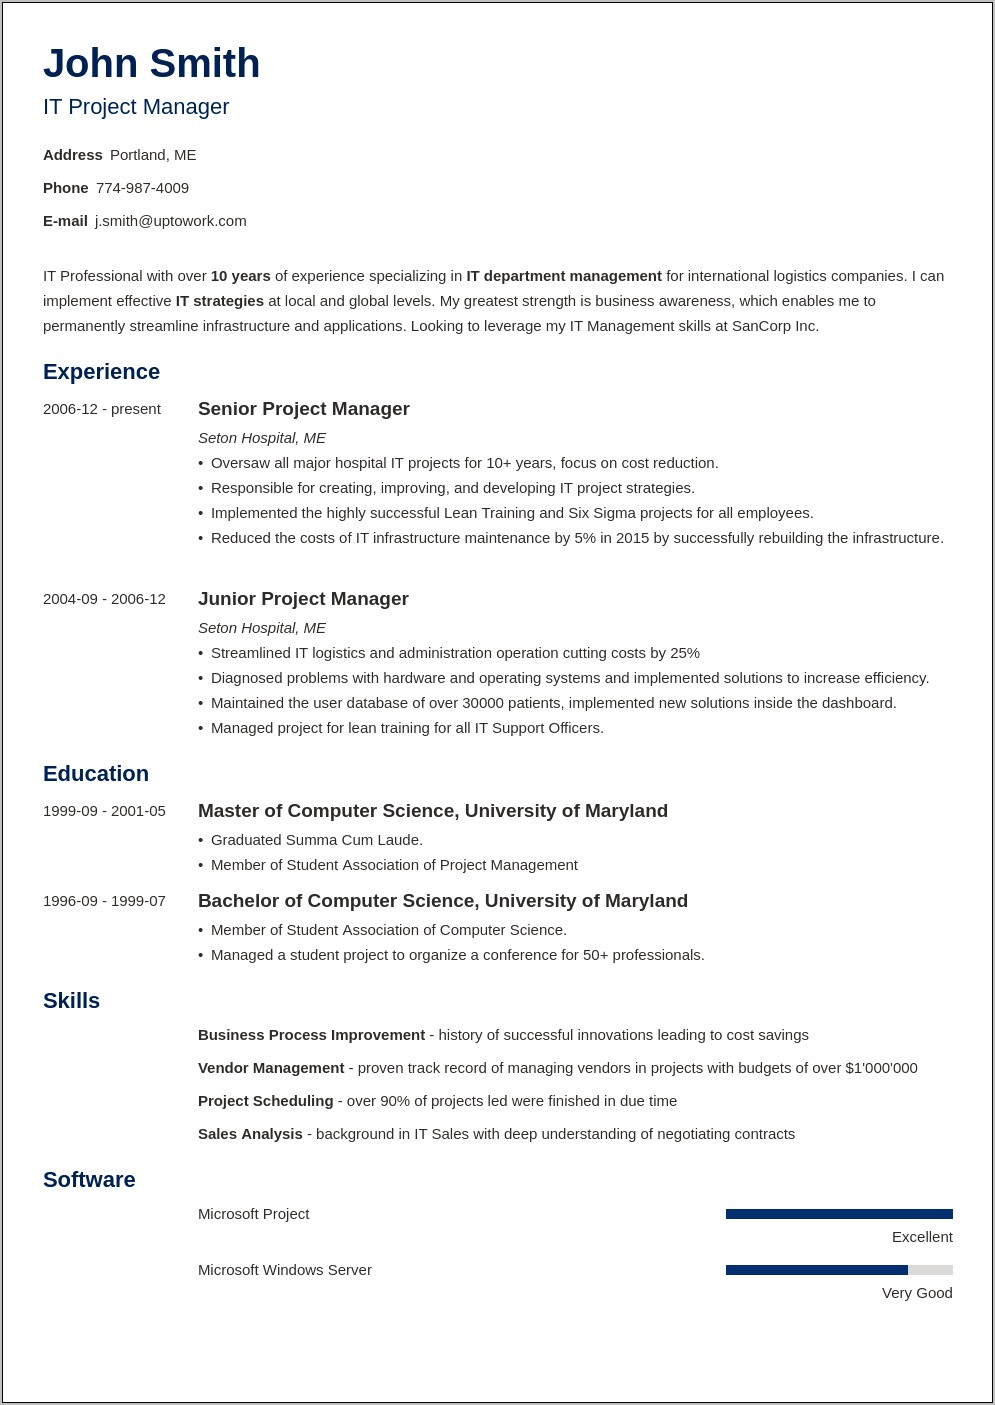 Free Fill In The Blank Resume